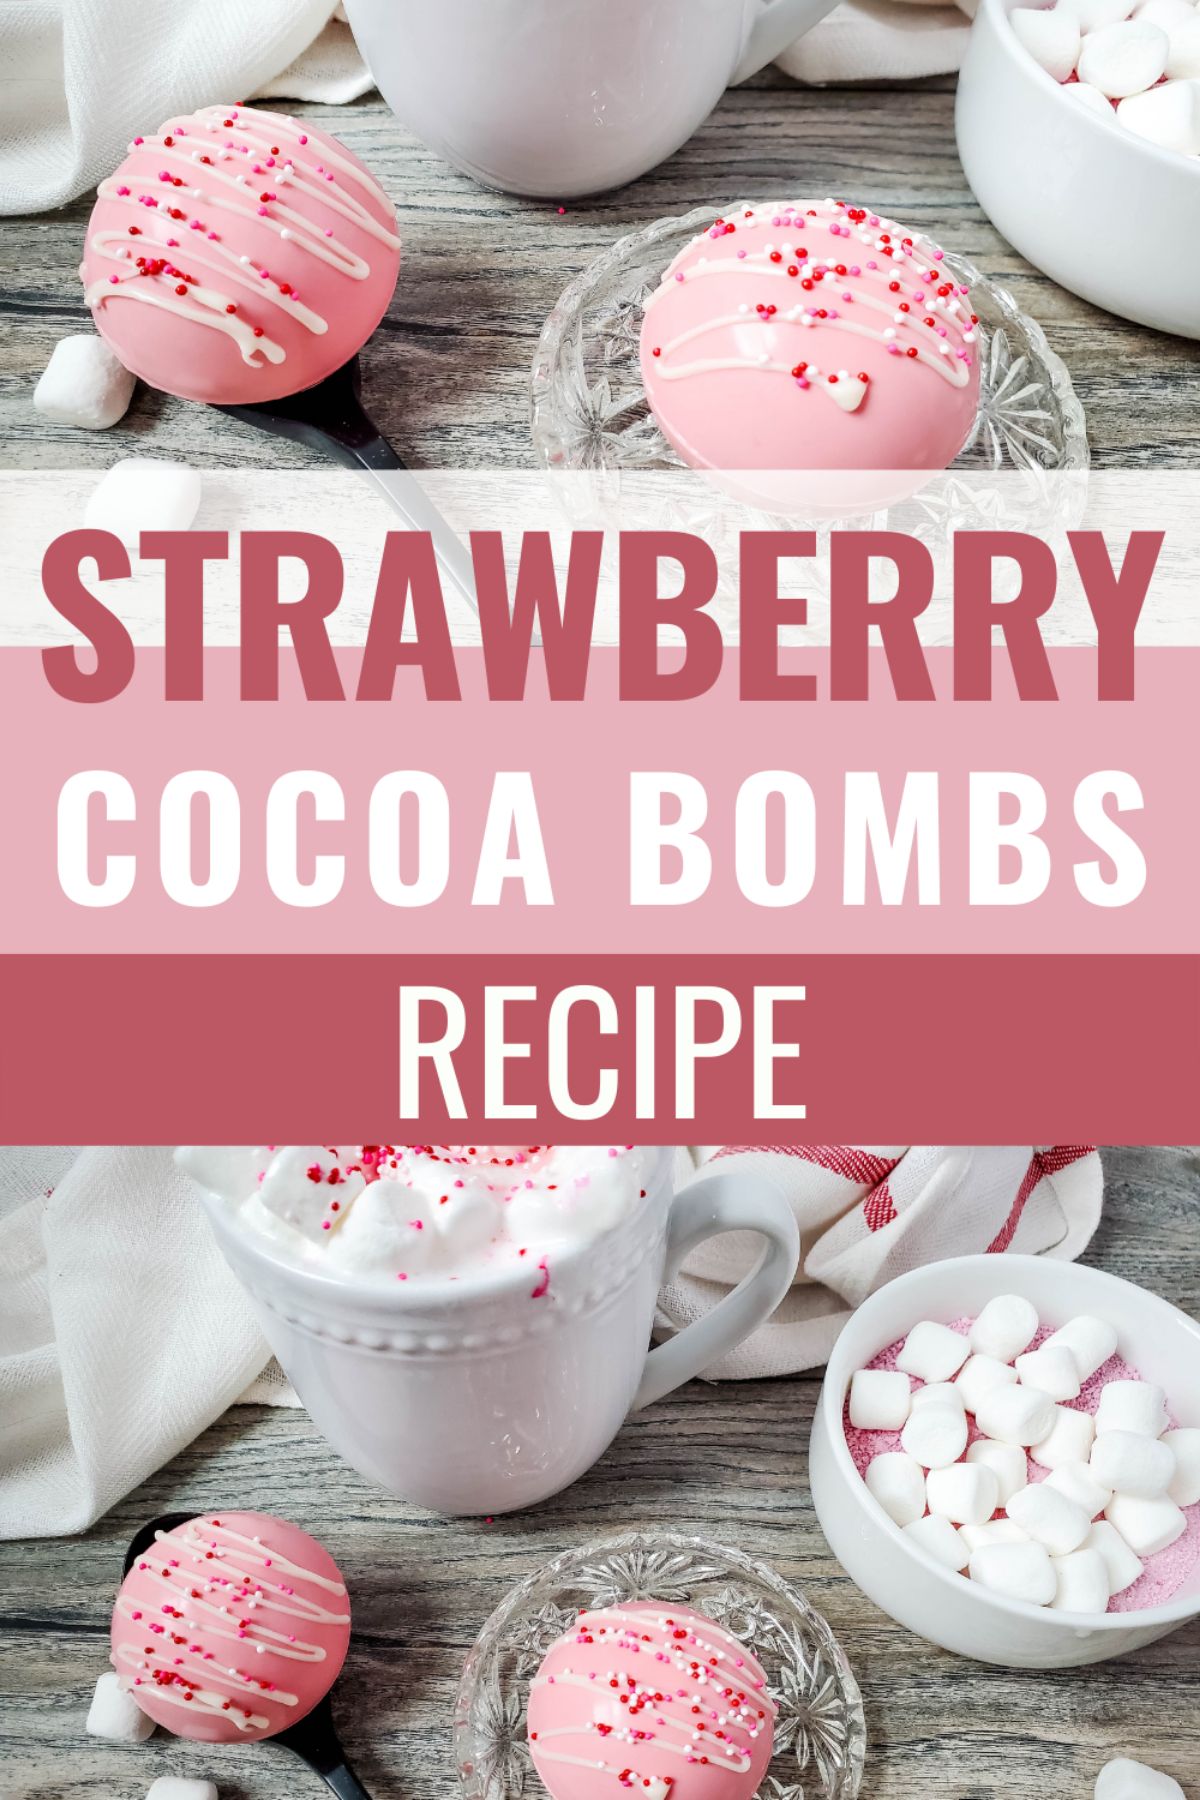 Strawberry Hot Cocoa Bombs are sweet and creamy with a tasty strawberry flavor. They're perfect for Valentine’s Day or a pink party. #strawberry #hotcocoabombs #valentinesday #winter #hotcocoa via @wondermomwannab